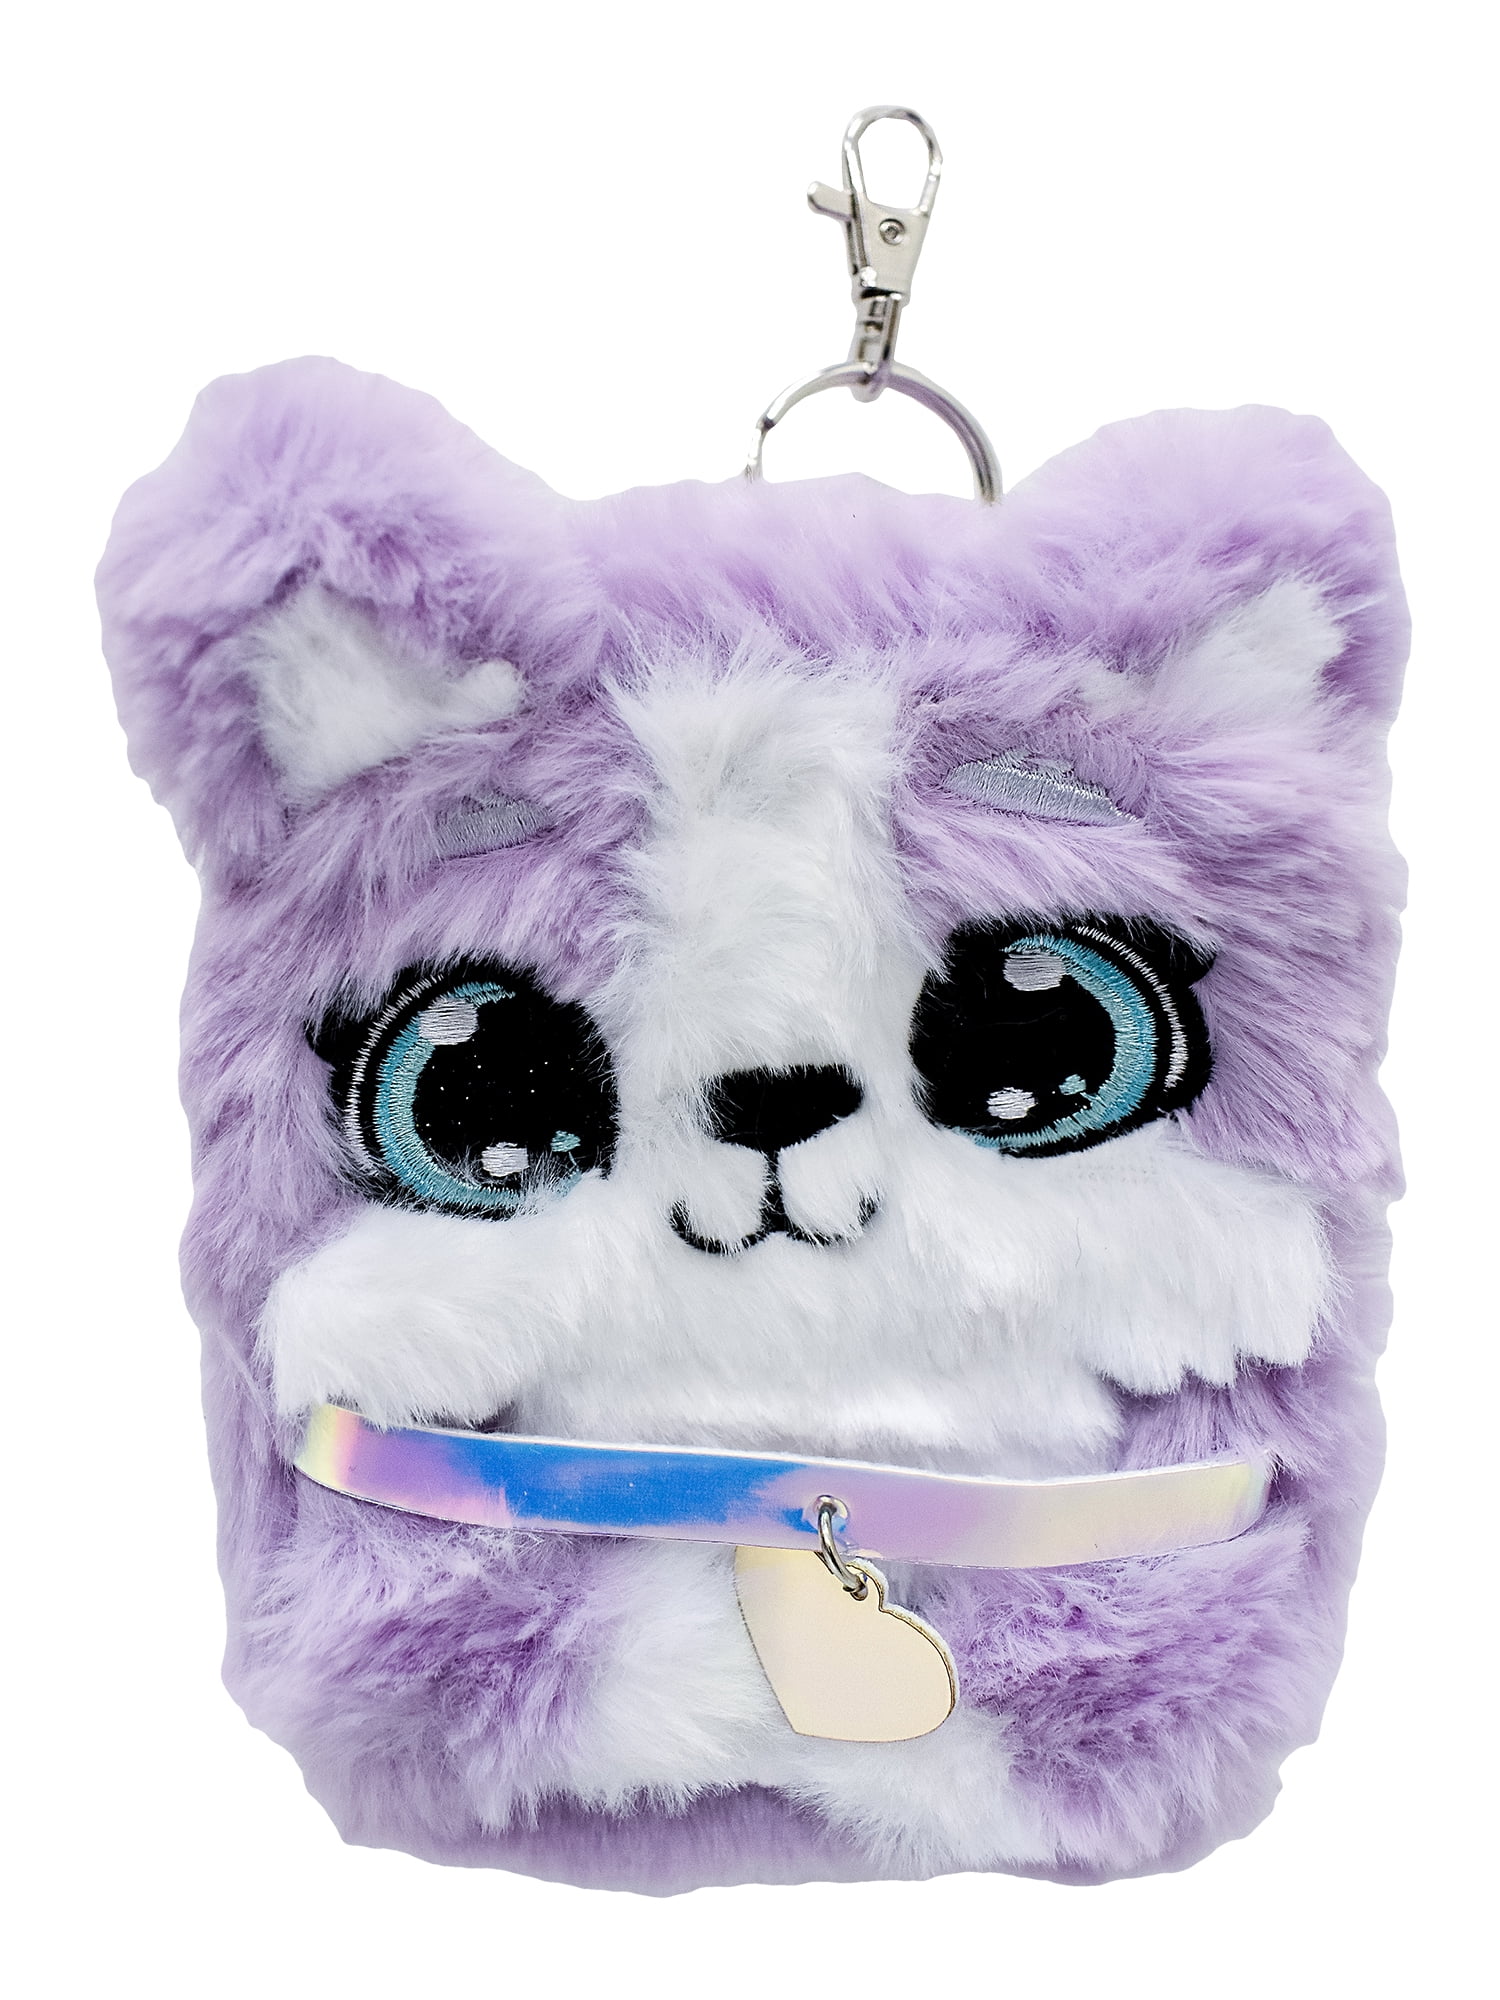 Things We're Diggin': Castle Crasher Pets Cell Phone Straps